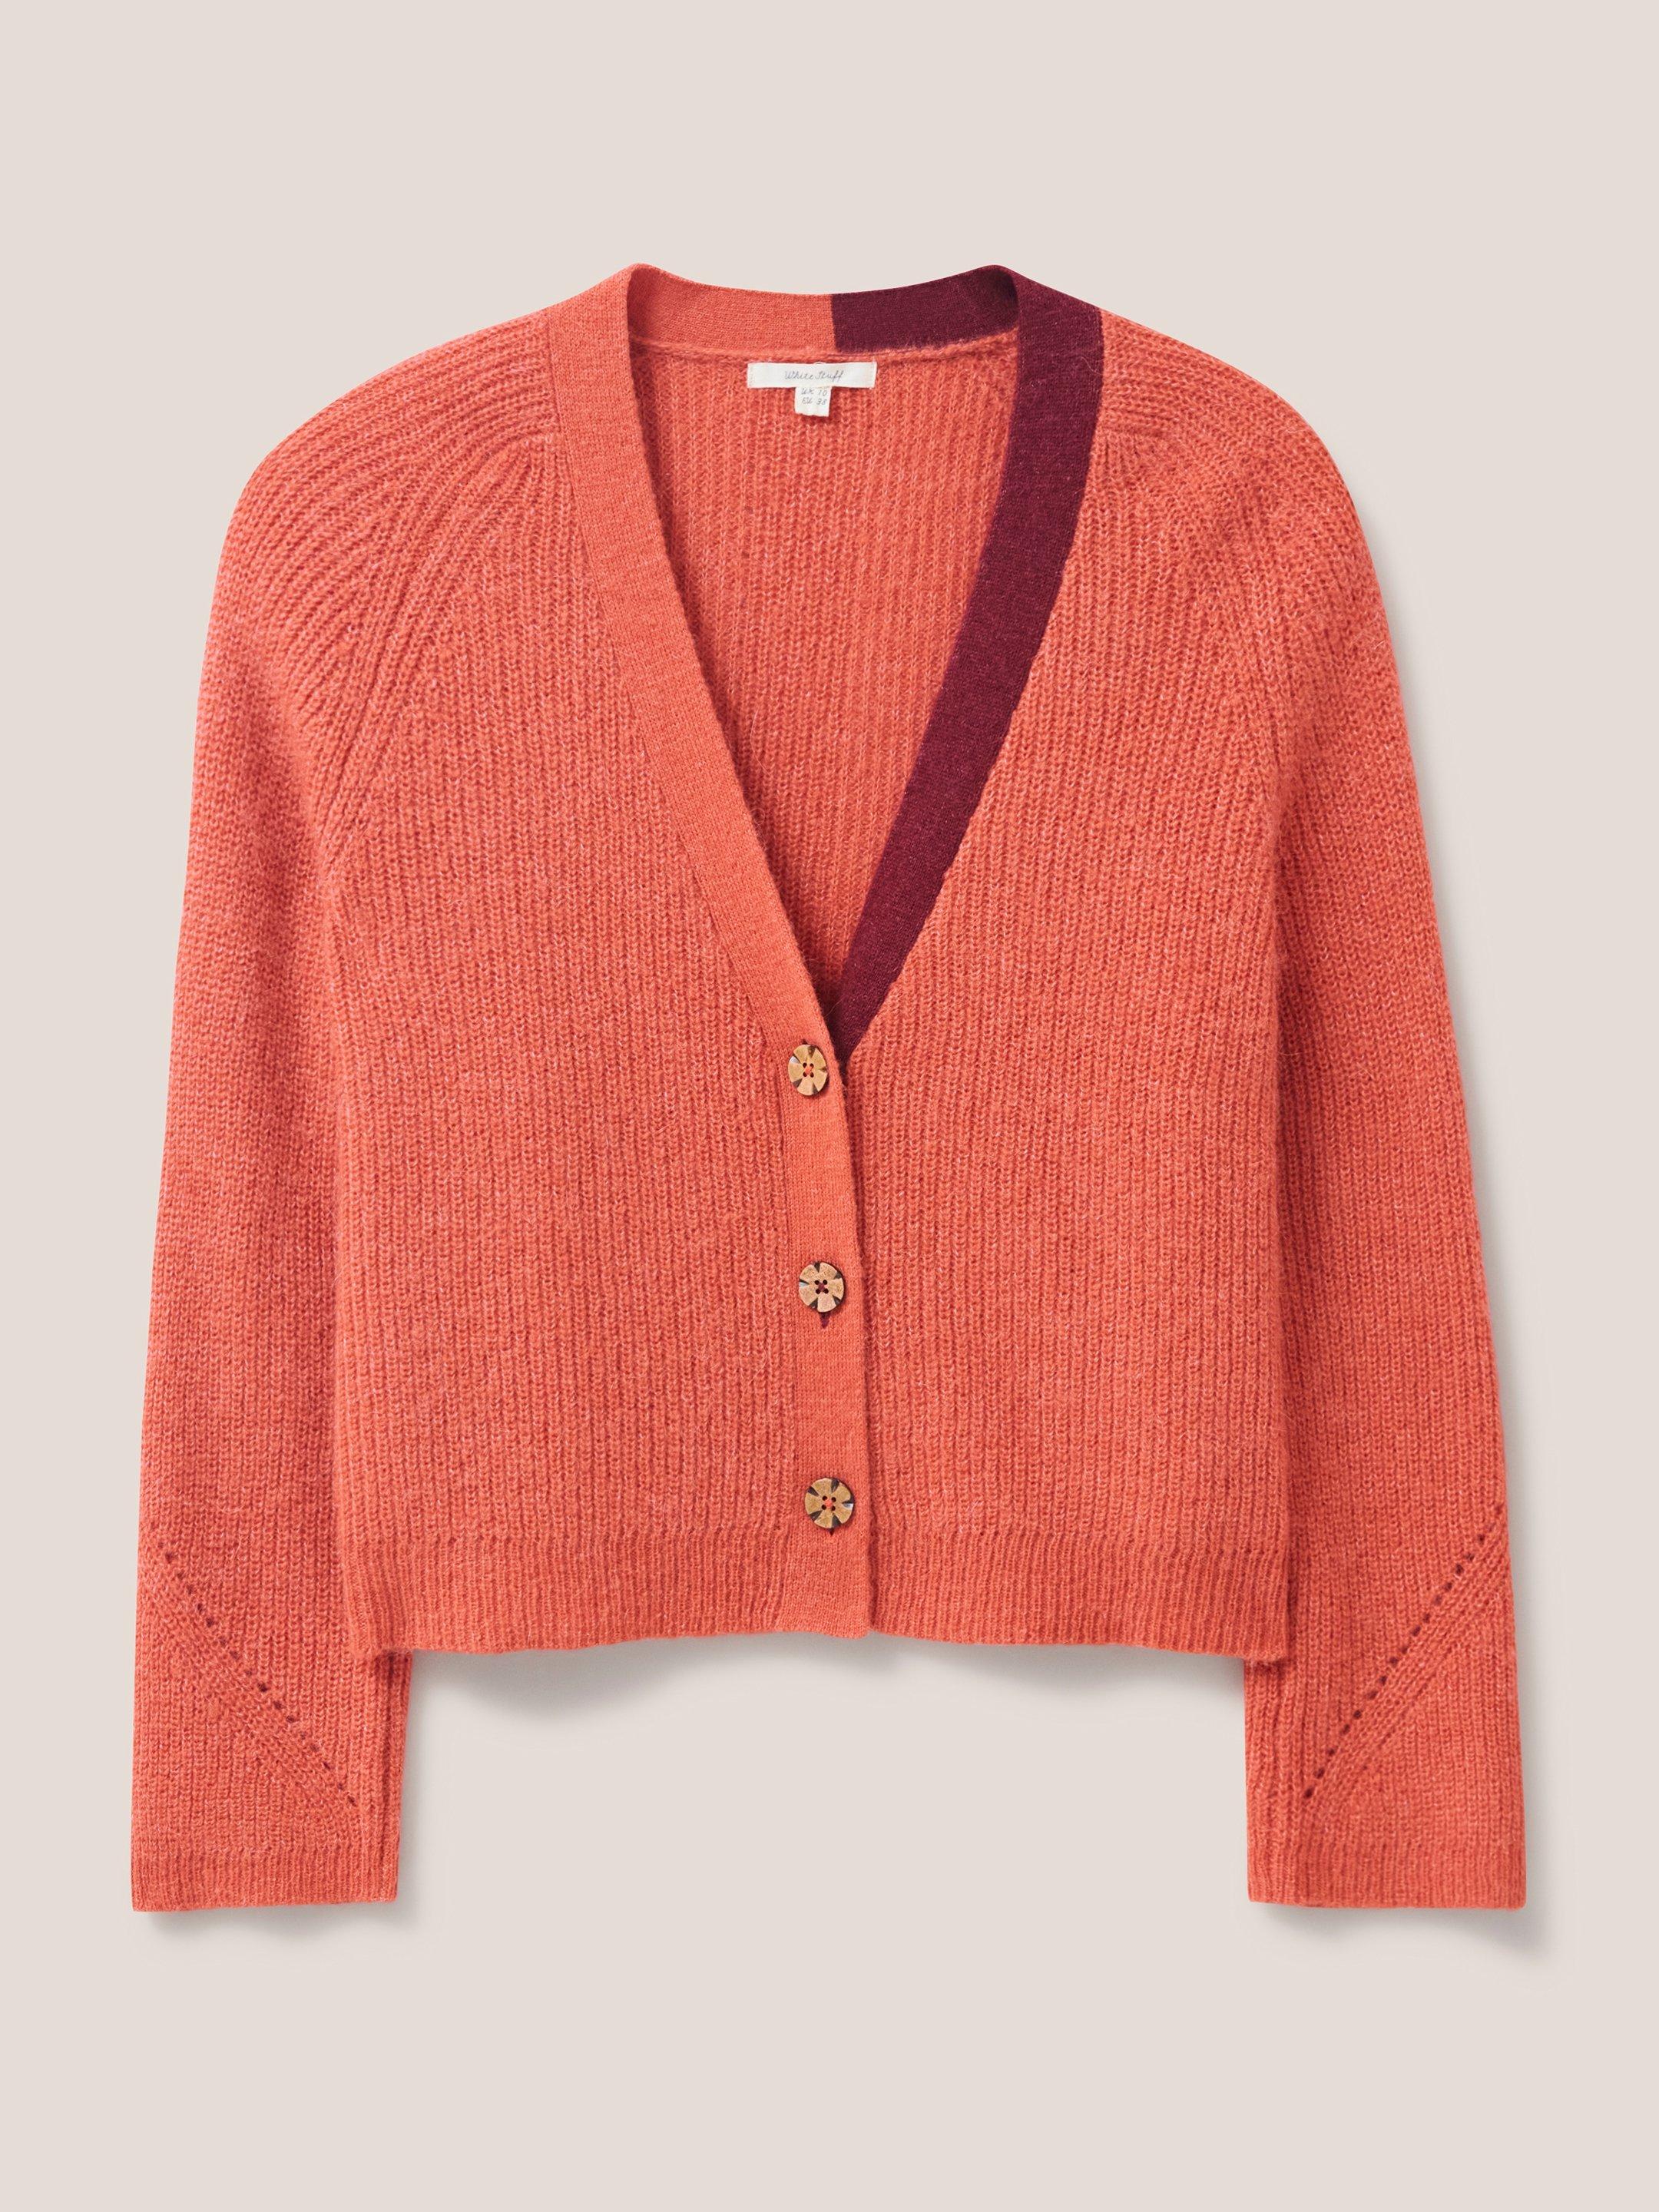 Dehlia Knitted Cardigan in MID ORANGE - FLAT FRONT